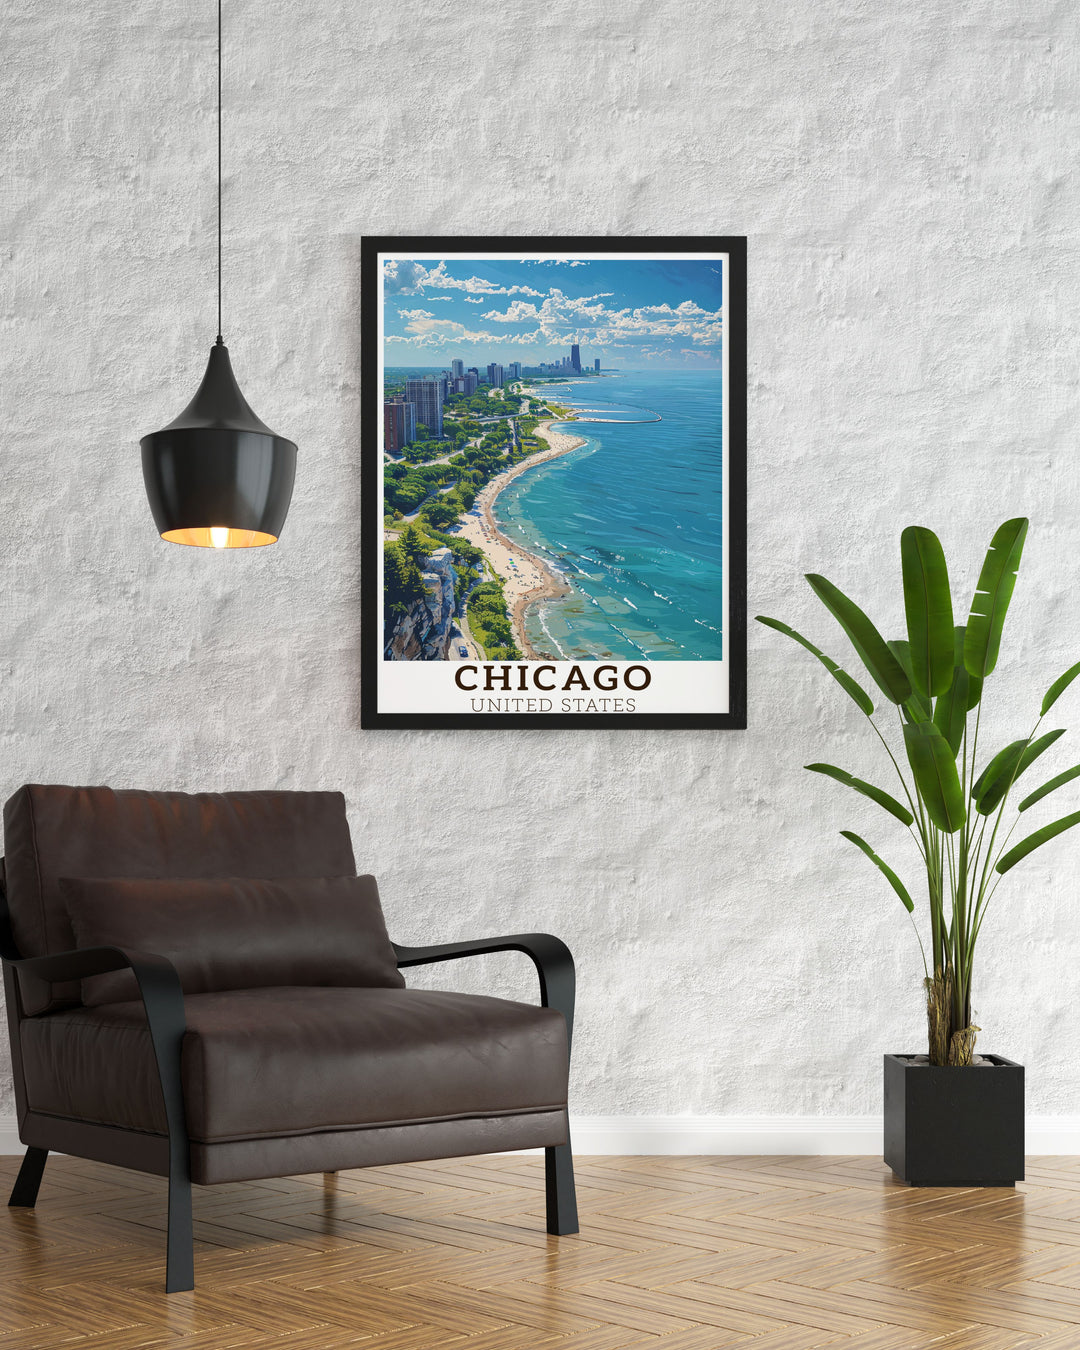 Stunning Lake Michigan artwork with a detailed Chicago cityscape making it a perfect addition to your home decor and a great Chicago gift for travel enthusiasts.